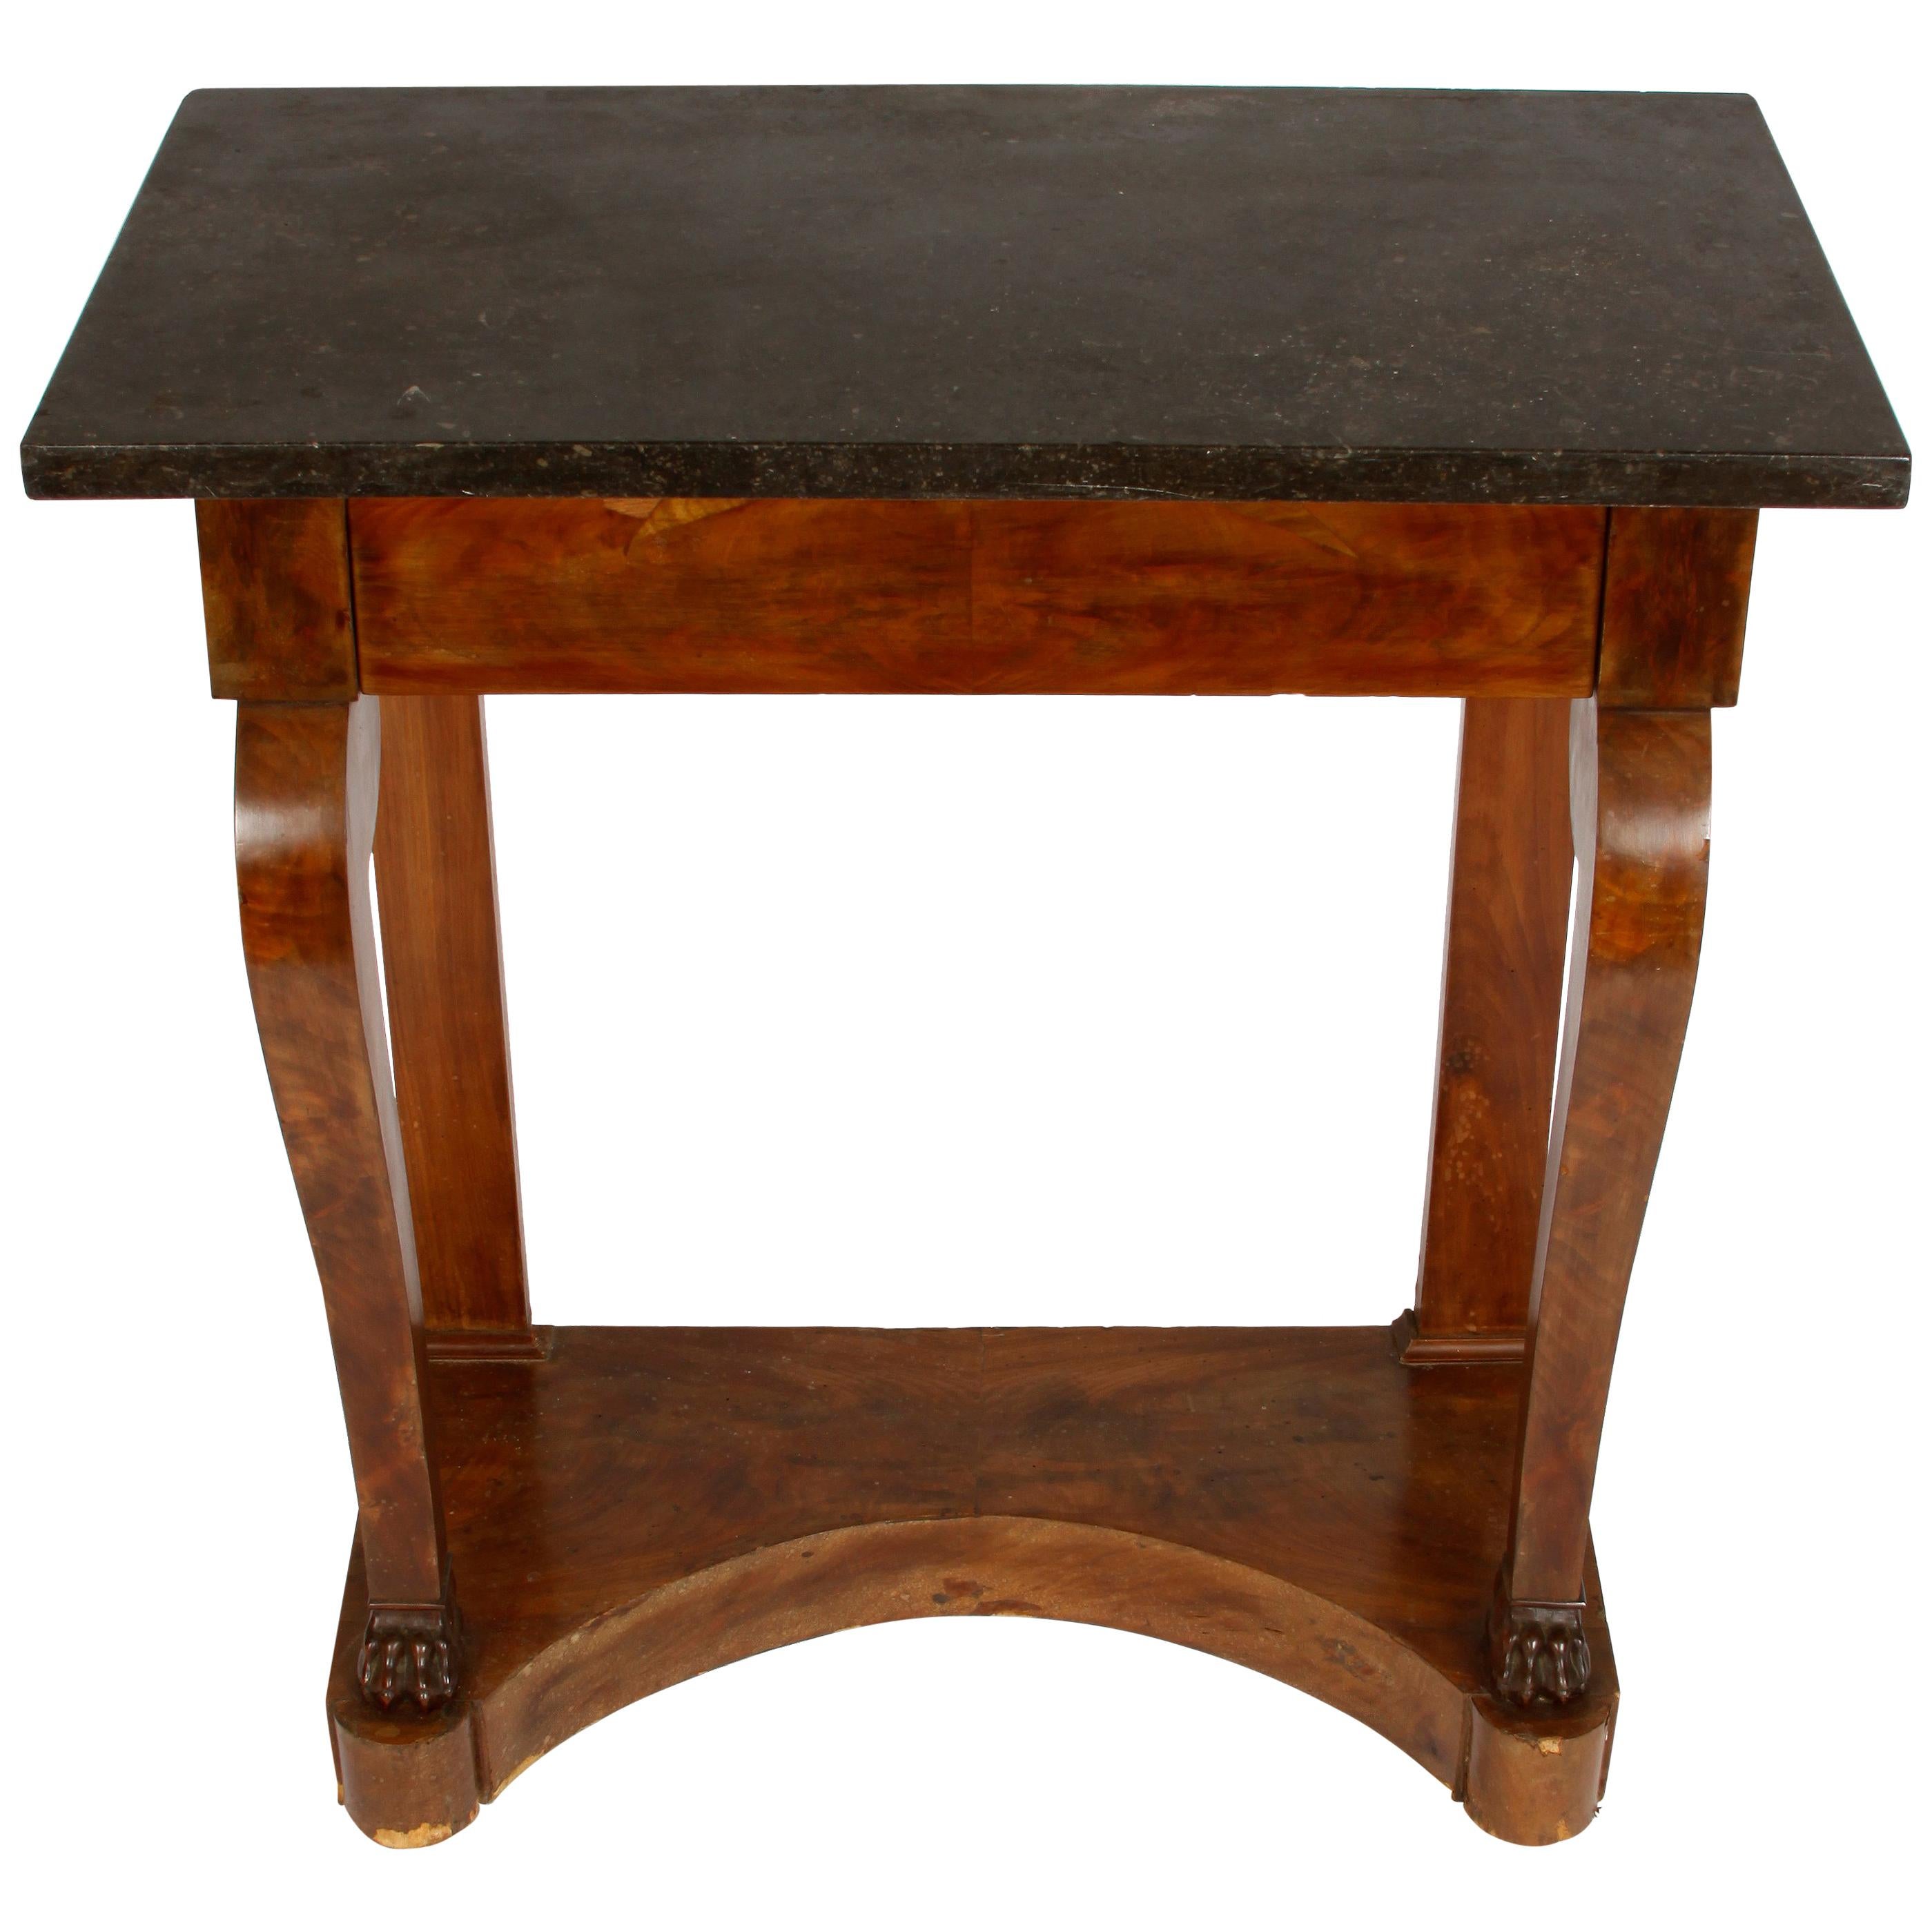 French Empire Marble Top Walnut Pier Table